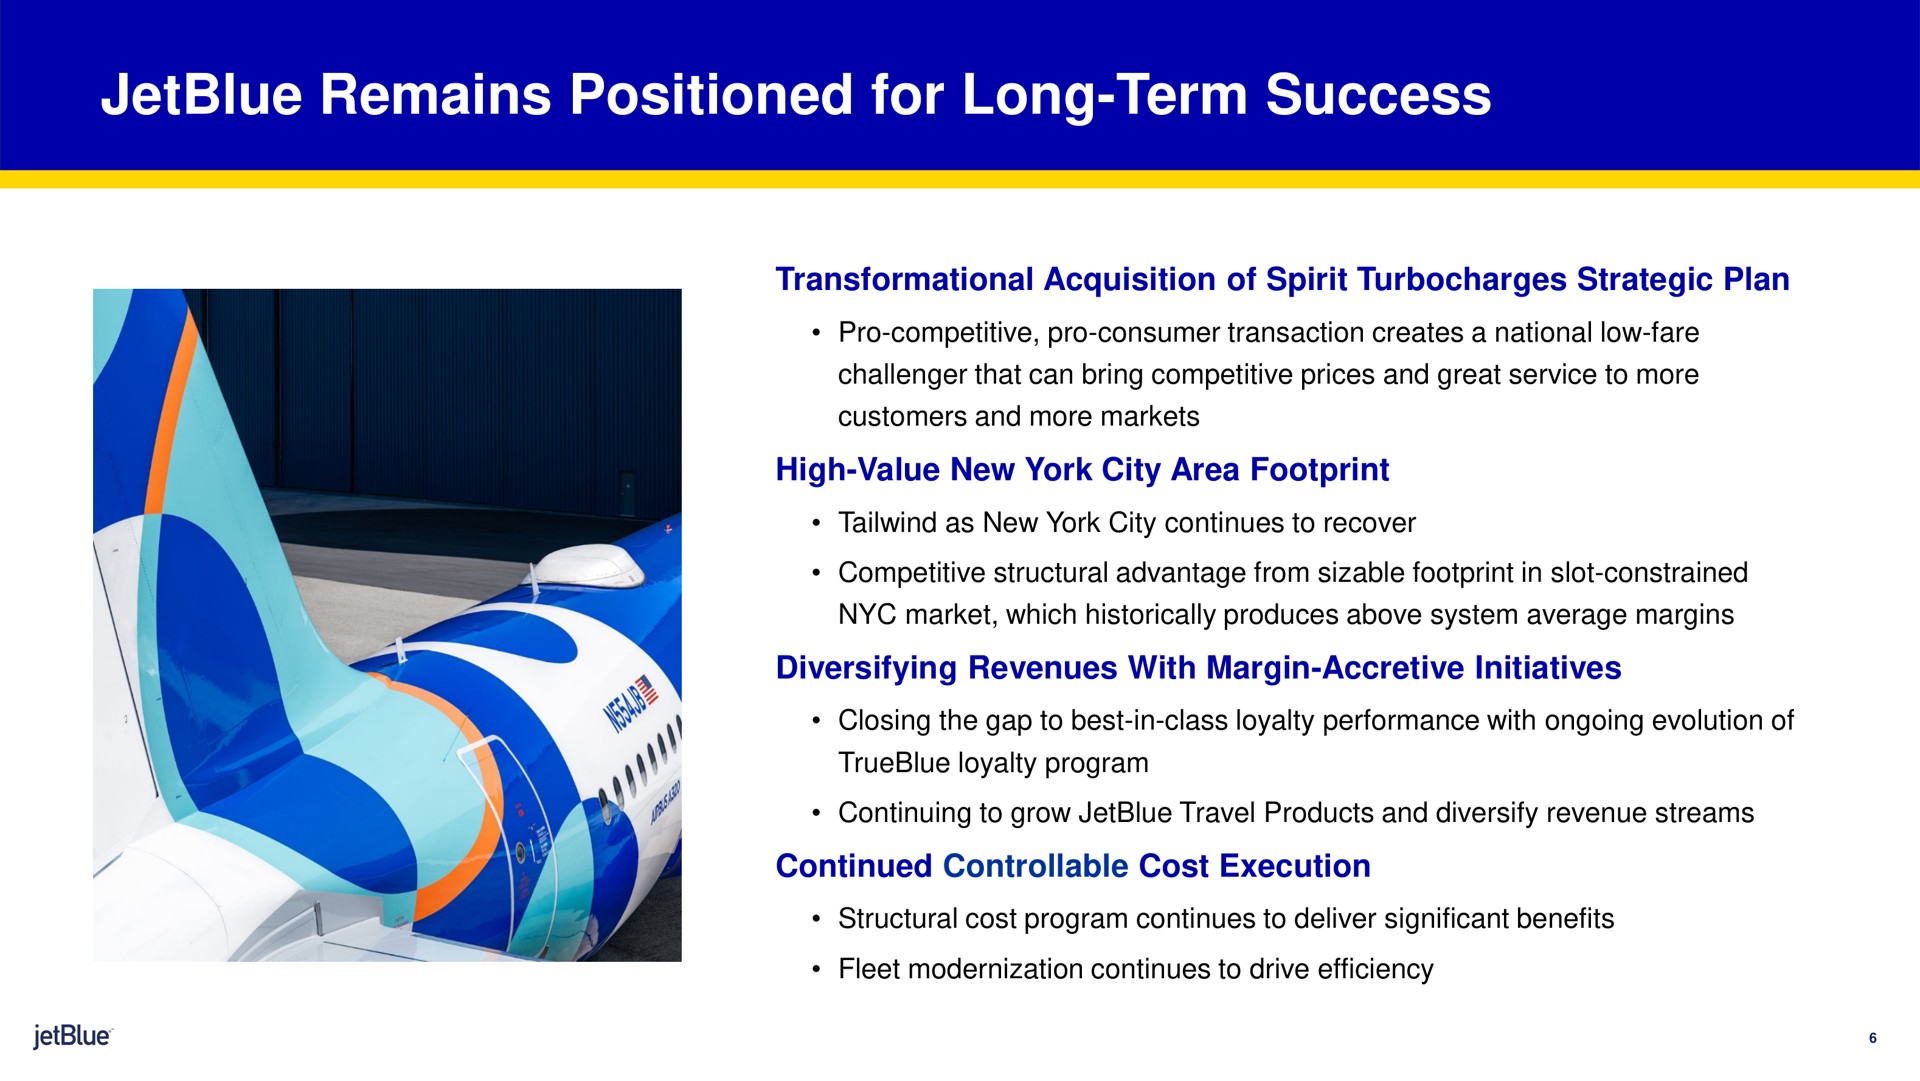 remains positioned for long term success acquisition of spirit strategic plan high value new york city area footprint diversifying revenues with margin accretive initiatives continued controllable cost execution | jetBlue